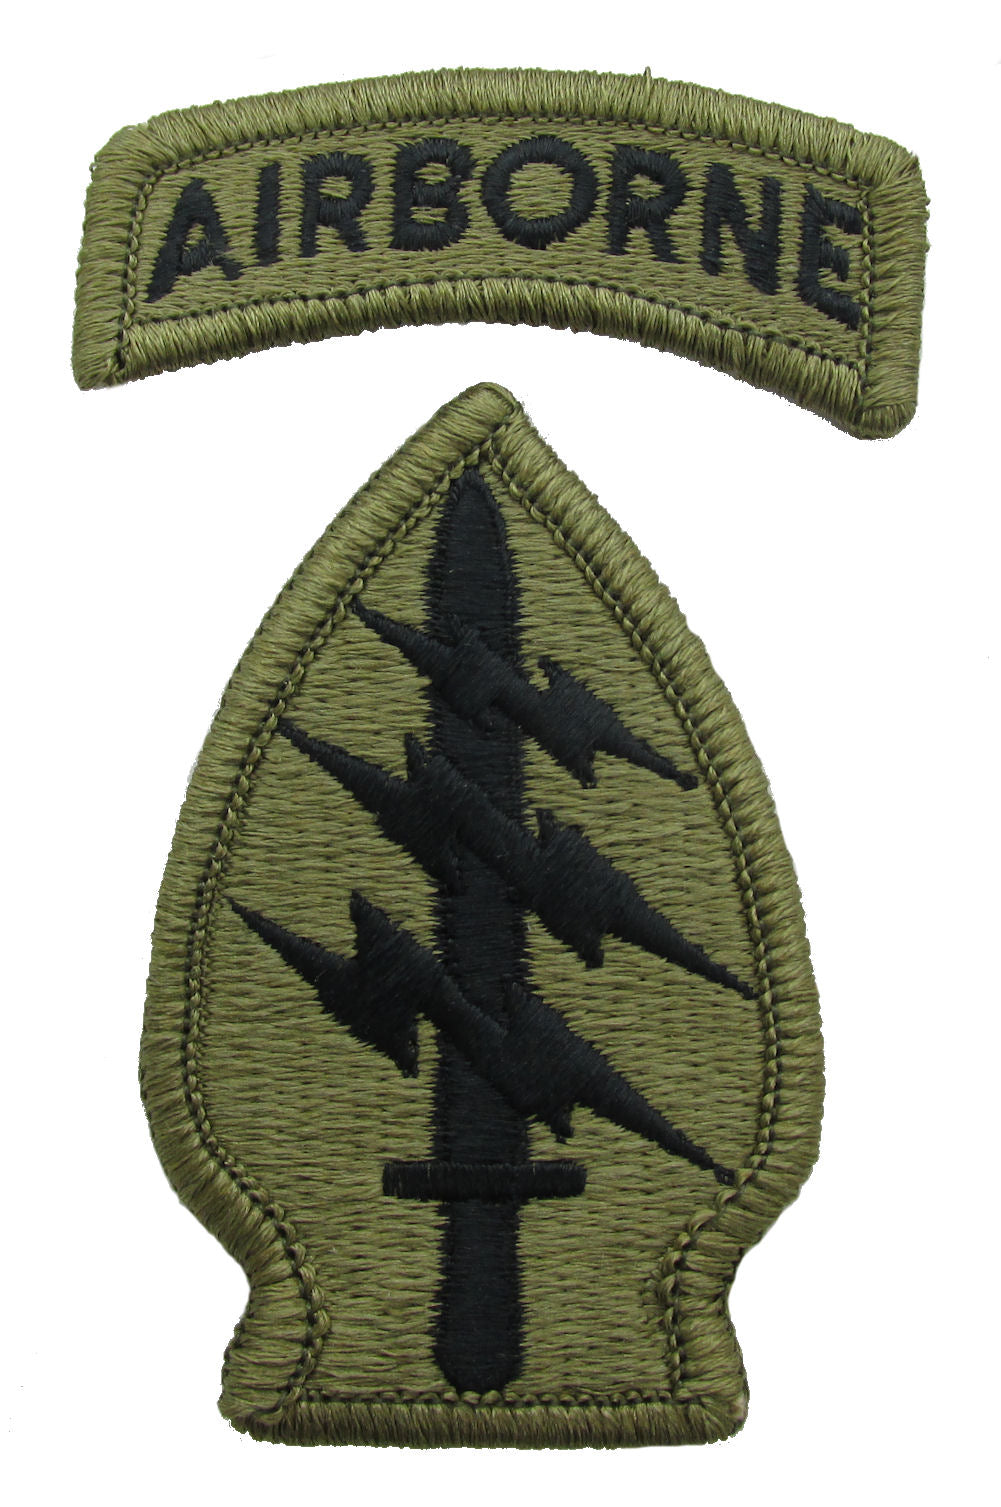 SOCOM, Airborne patches with velcro